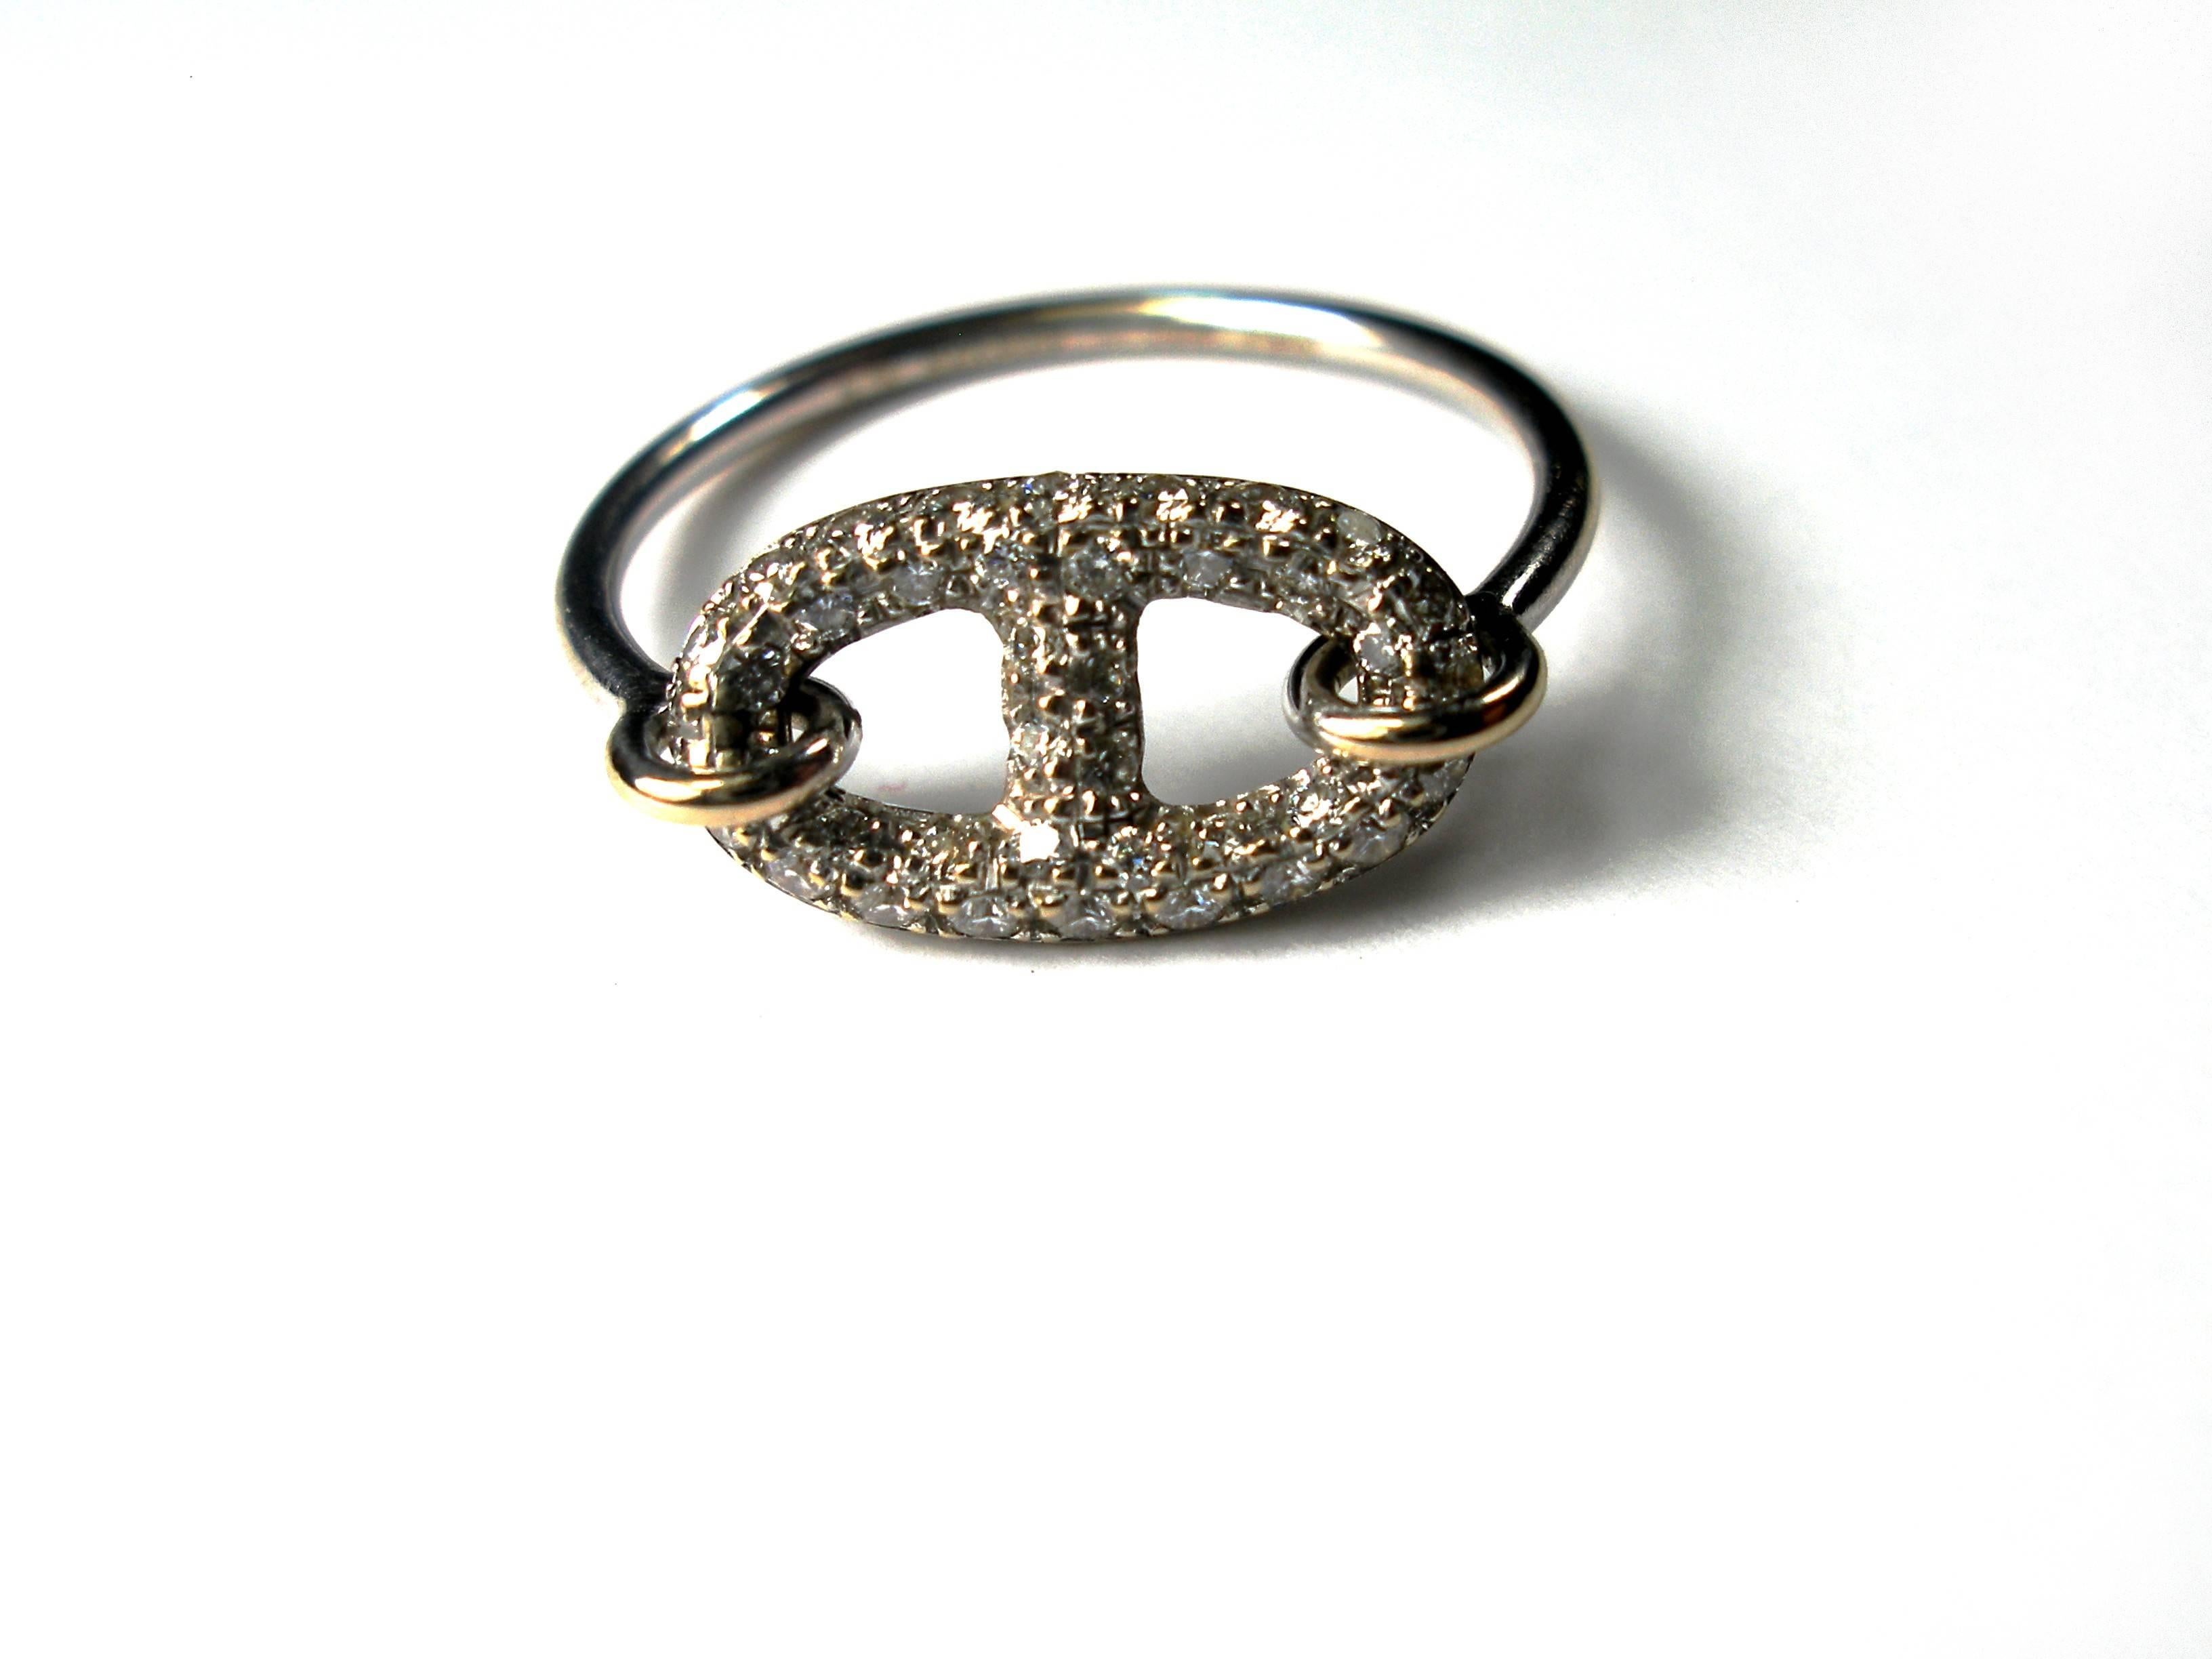  HERMES Ring Diamond and 18K White Gold Chaine D'Ancre 2